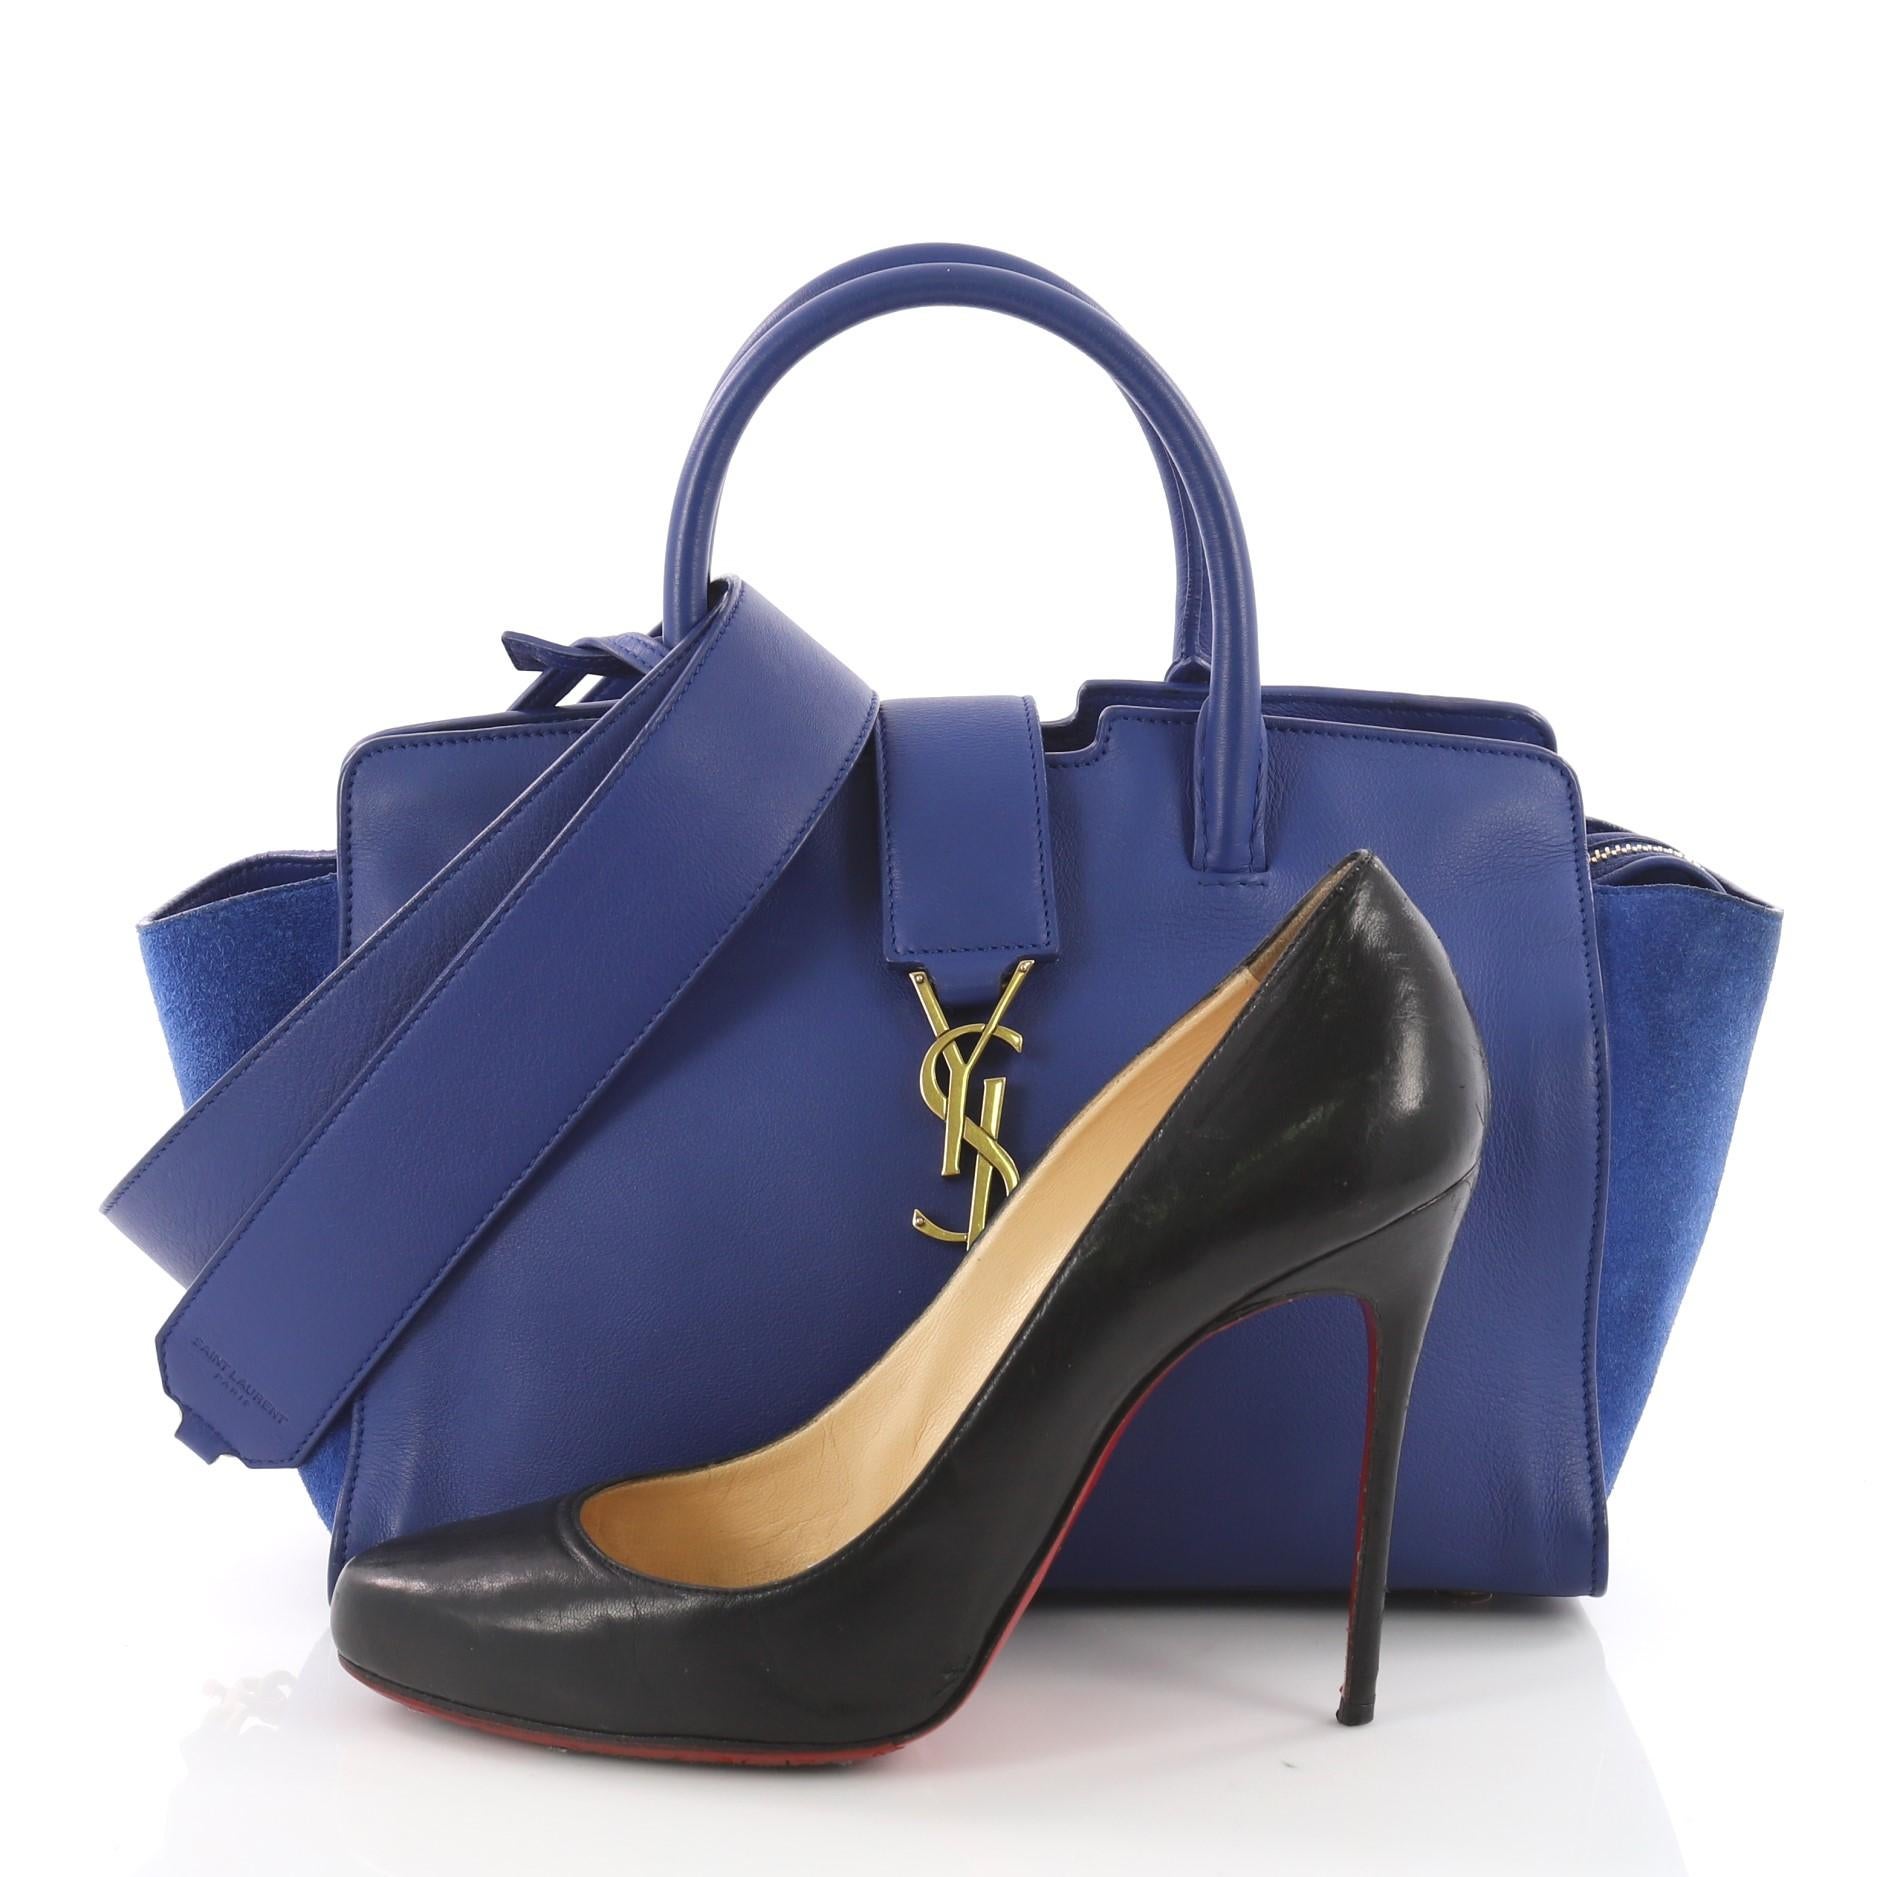 This Saint Laurent Monogram Cabas Downtown Leather with Suede Baby, crafted from blue leather, features dual rolled handles, YSL metal logo at the front, and gold-tone hardware . Its magnetic snap and zip closure opens to a blue suede interior with